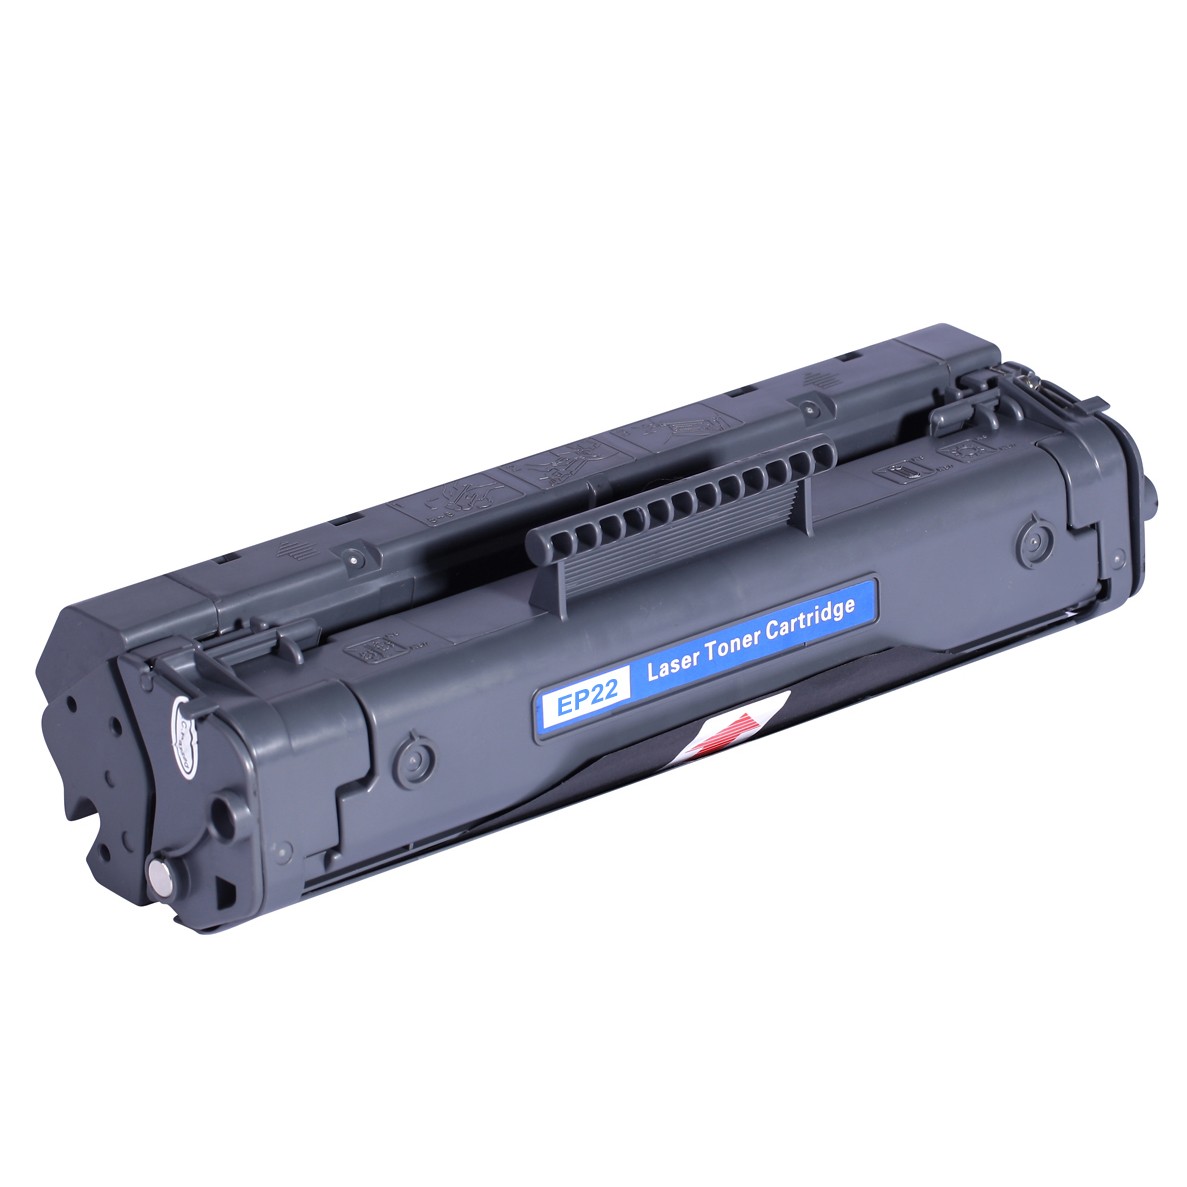 Canon EP-22 Laser toner, Black, Compatible pages) - Canon Laser toners - Pixojet Ink, toner and